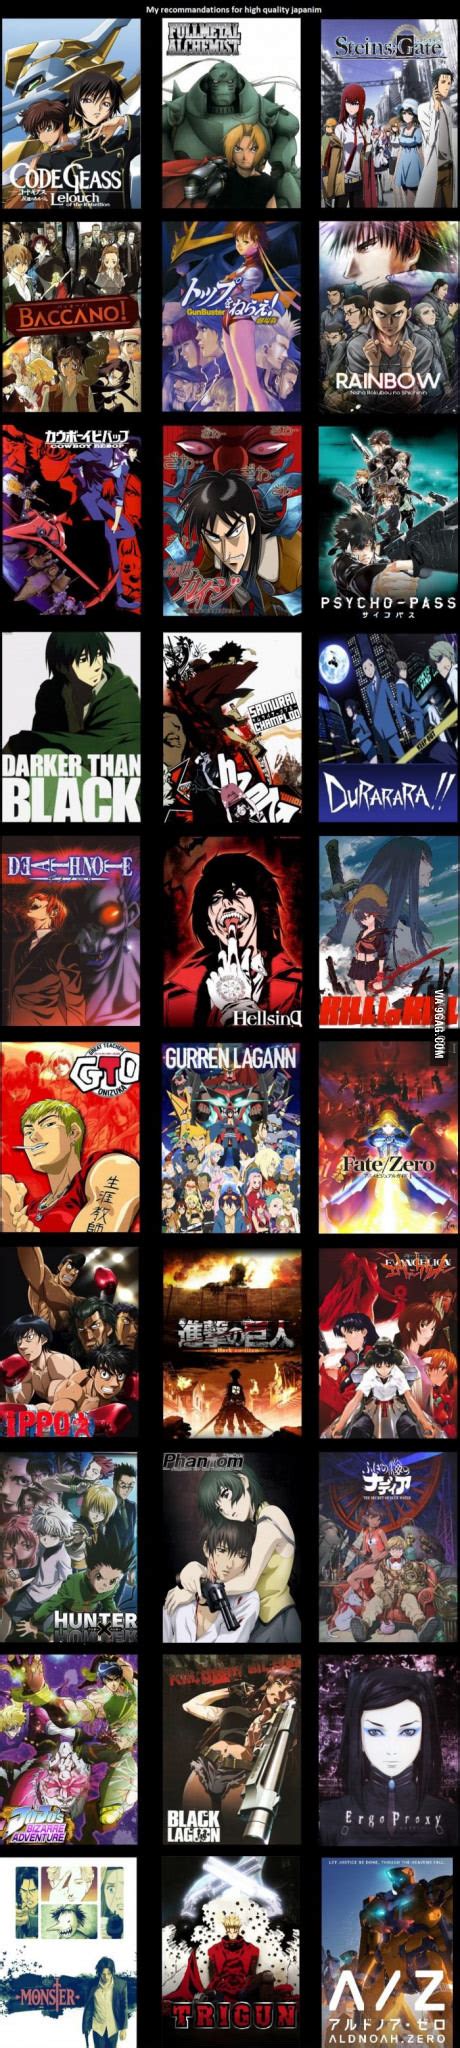 Here Is A List Of Good Anime Recommendations Enjoy Manga Anime